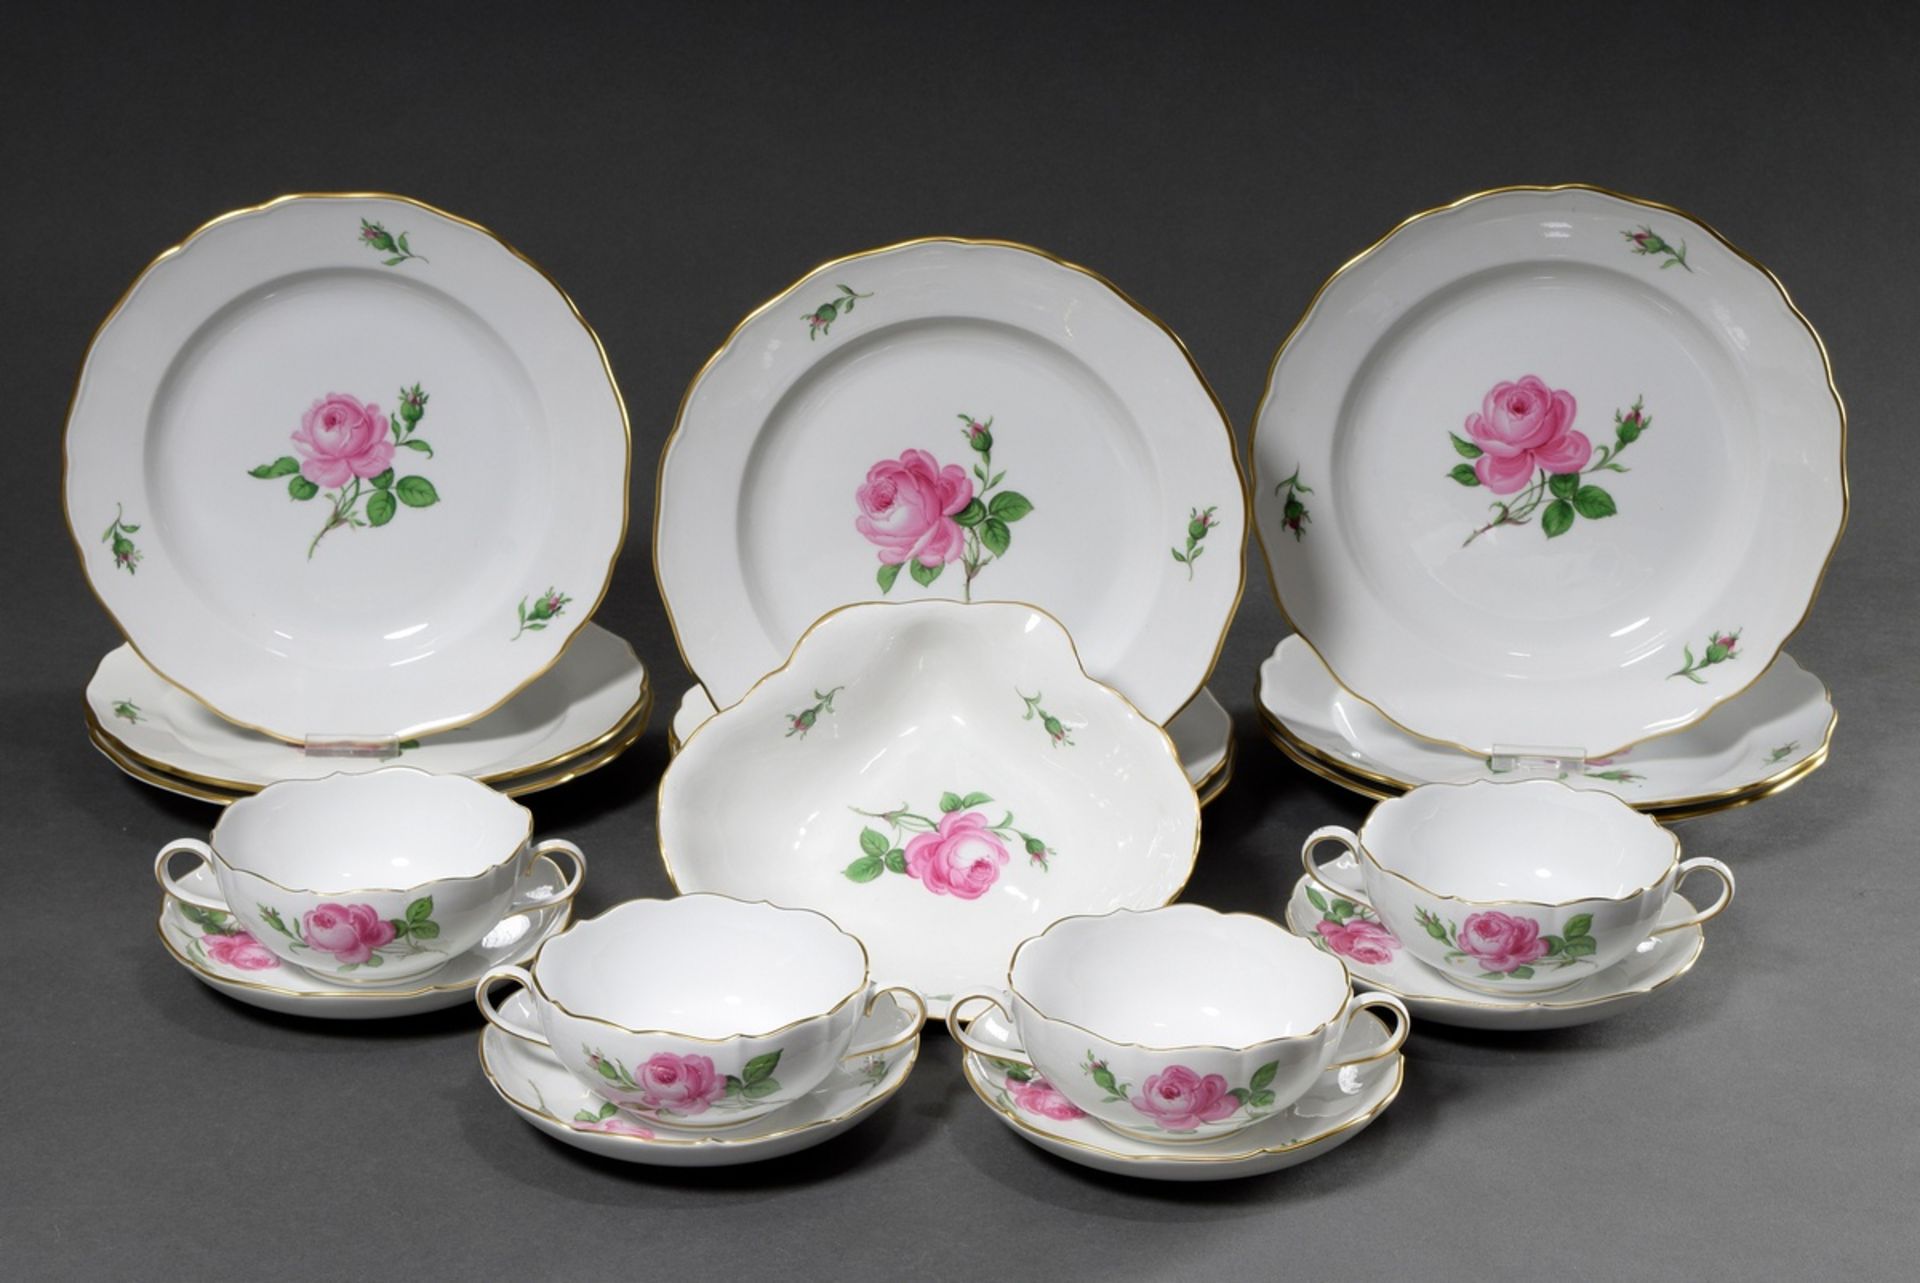 14 pieces Meissen "Red Rose", consisting of: 9 dinner plates (Ø 25cm, 3x 2 grinds), 4 soup cups wit